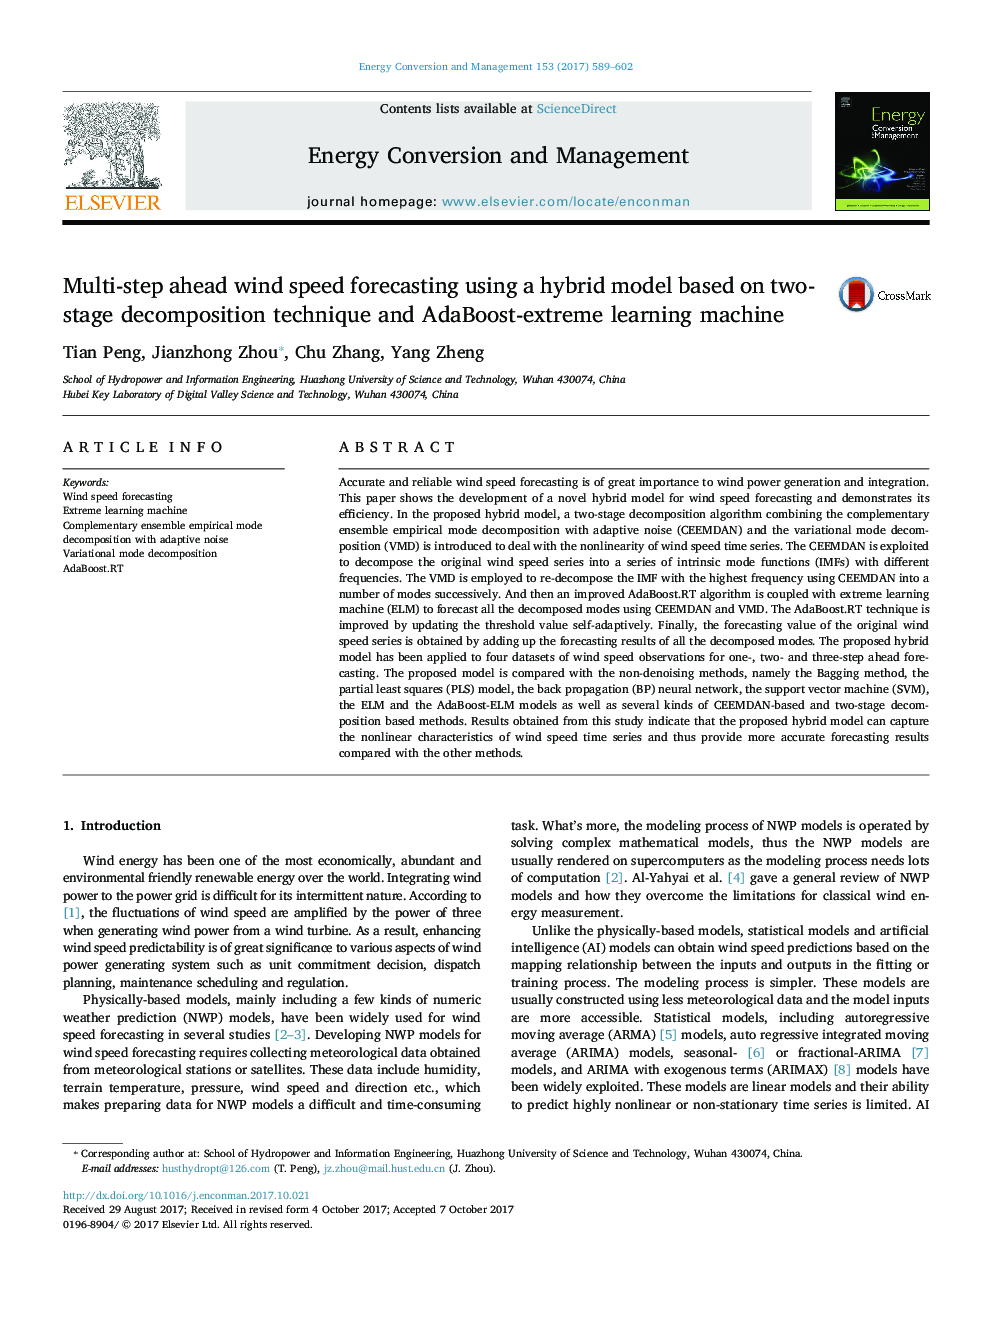 Multi-step ahead wind speed forecasting using a hybrid model based on two-stage decomposition technique and AdaBoost-extreme learning machine